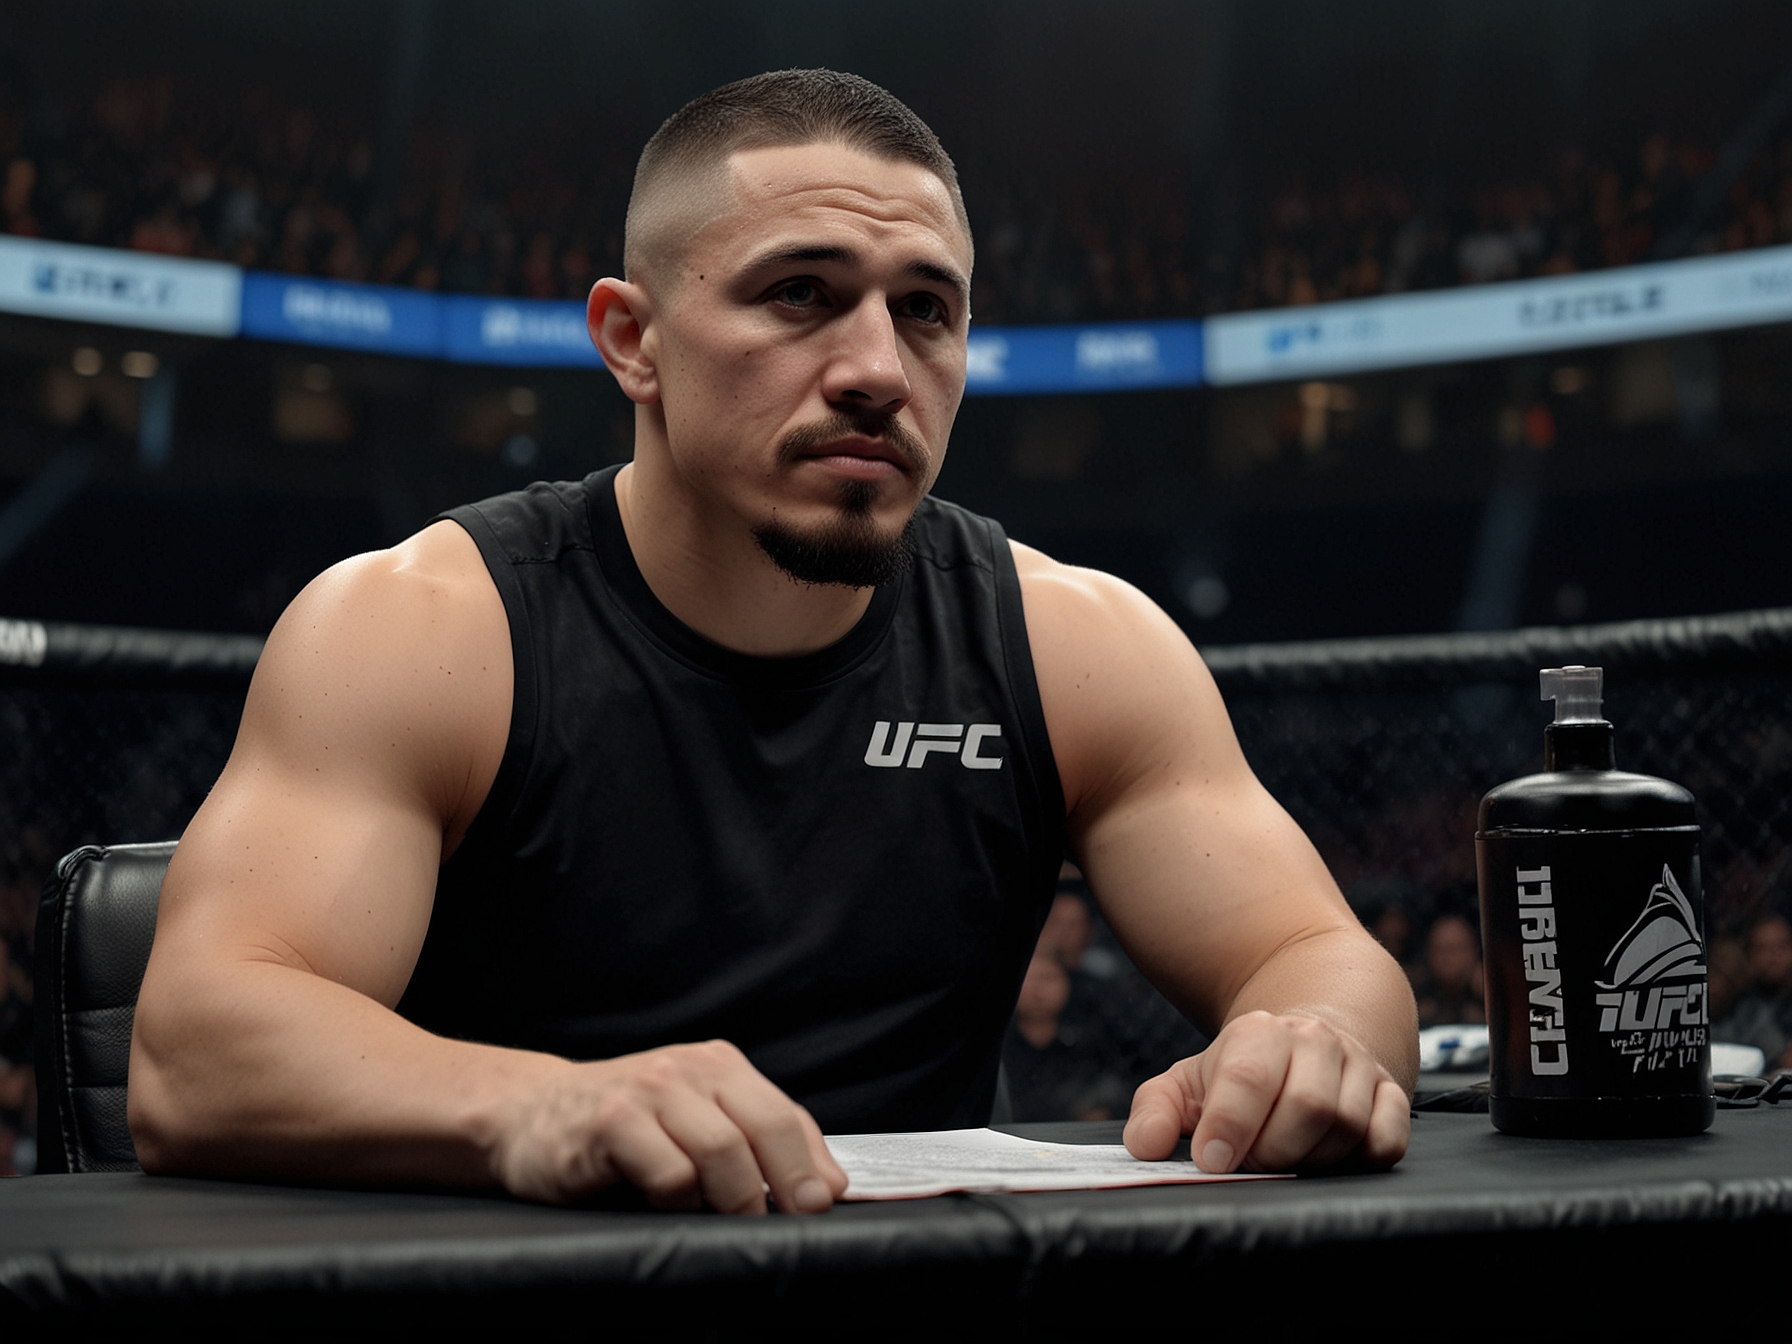 Whittaker sits behind a commentary desk beside UFC analysts, signifying his potential future role as a UFC commentator, ready to provide expert fight analysis.